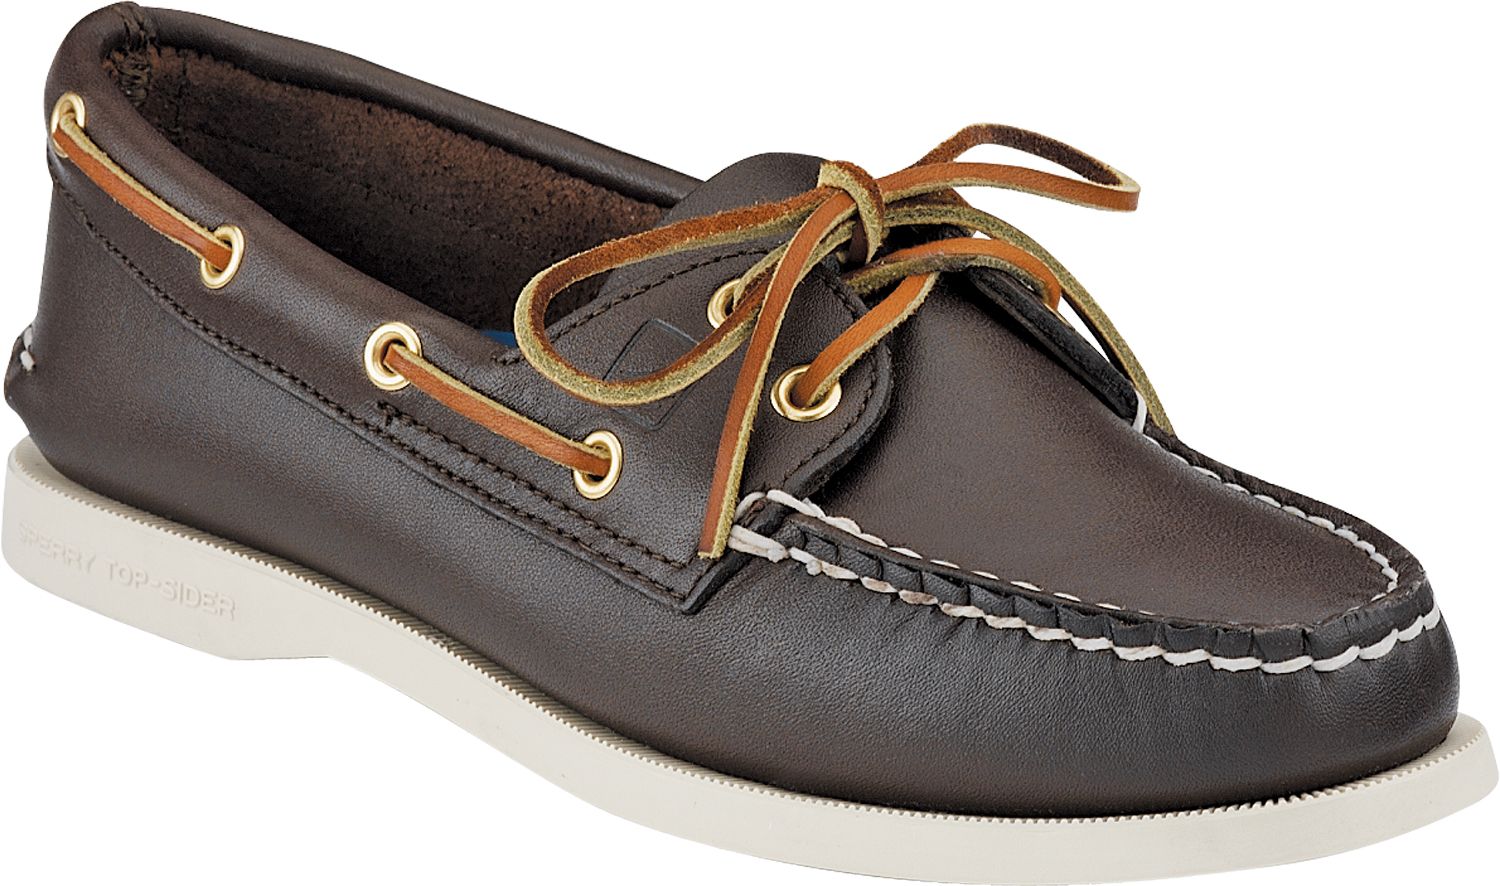 sperry shoes women price